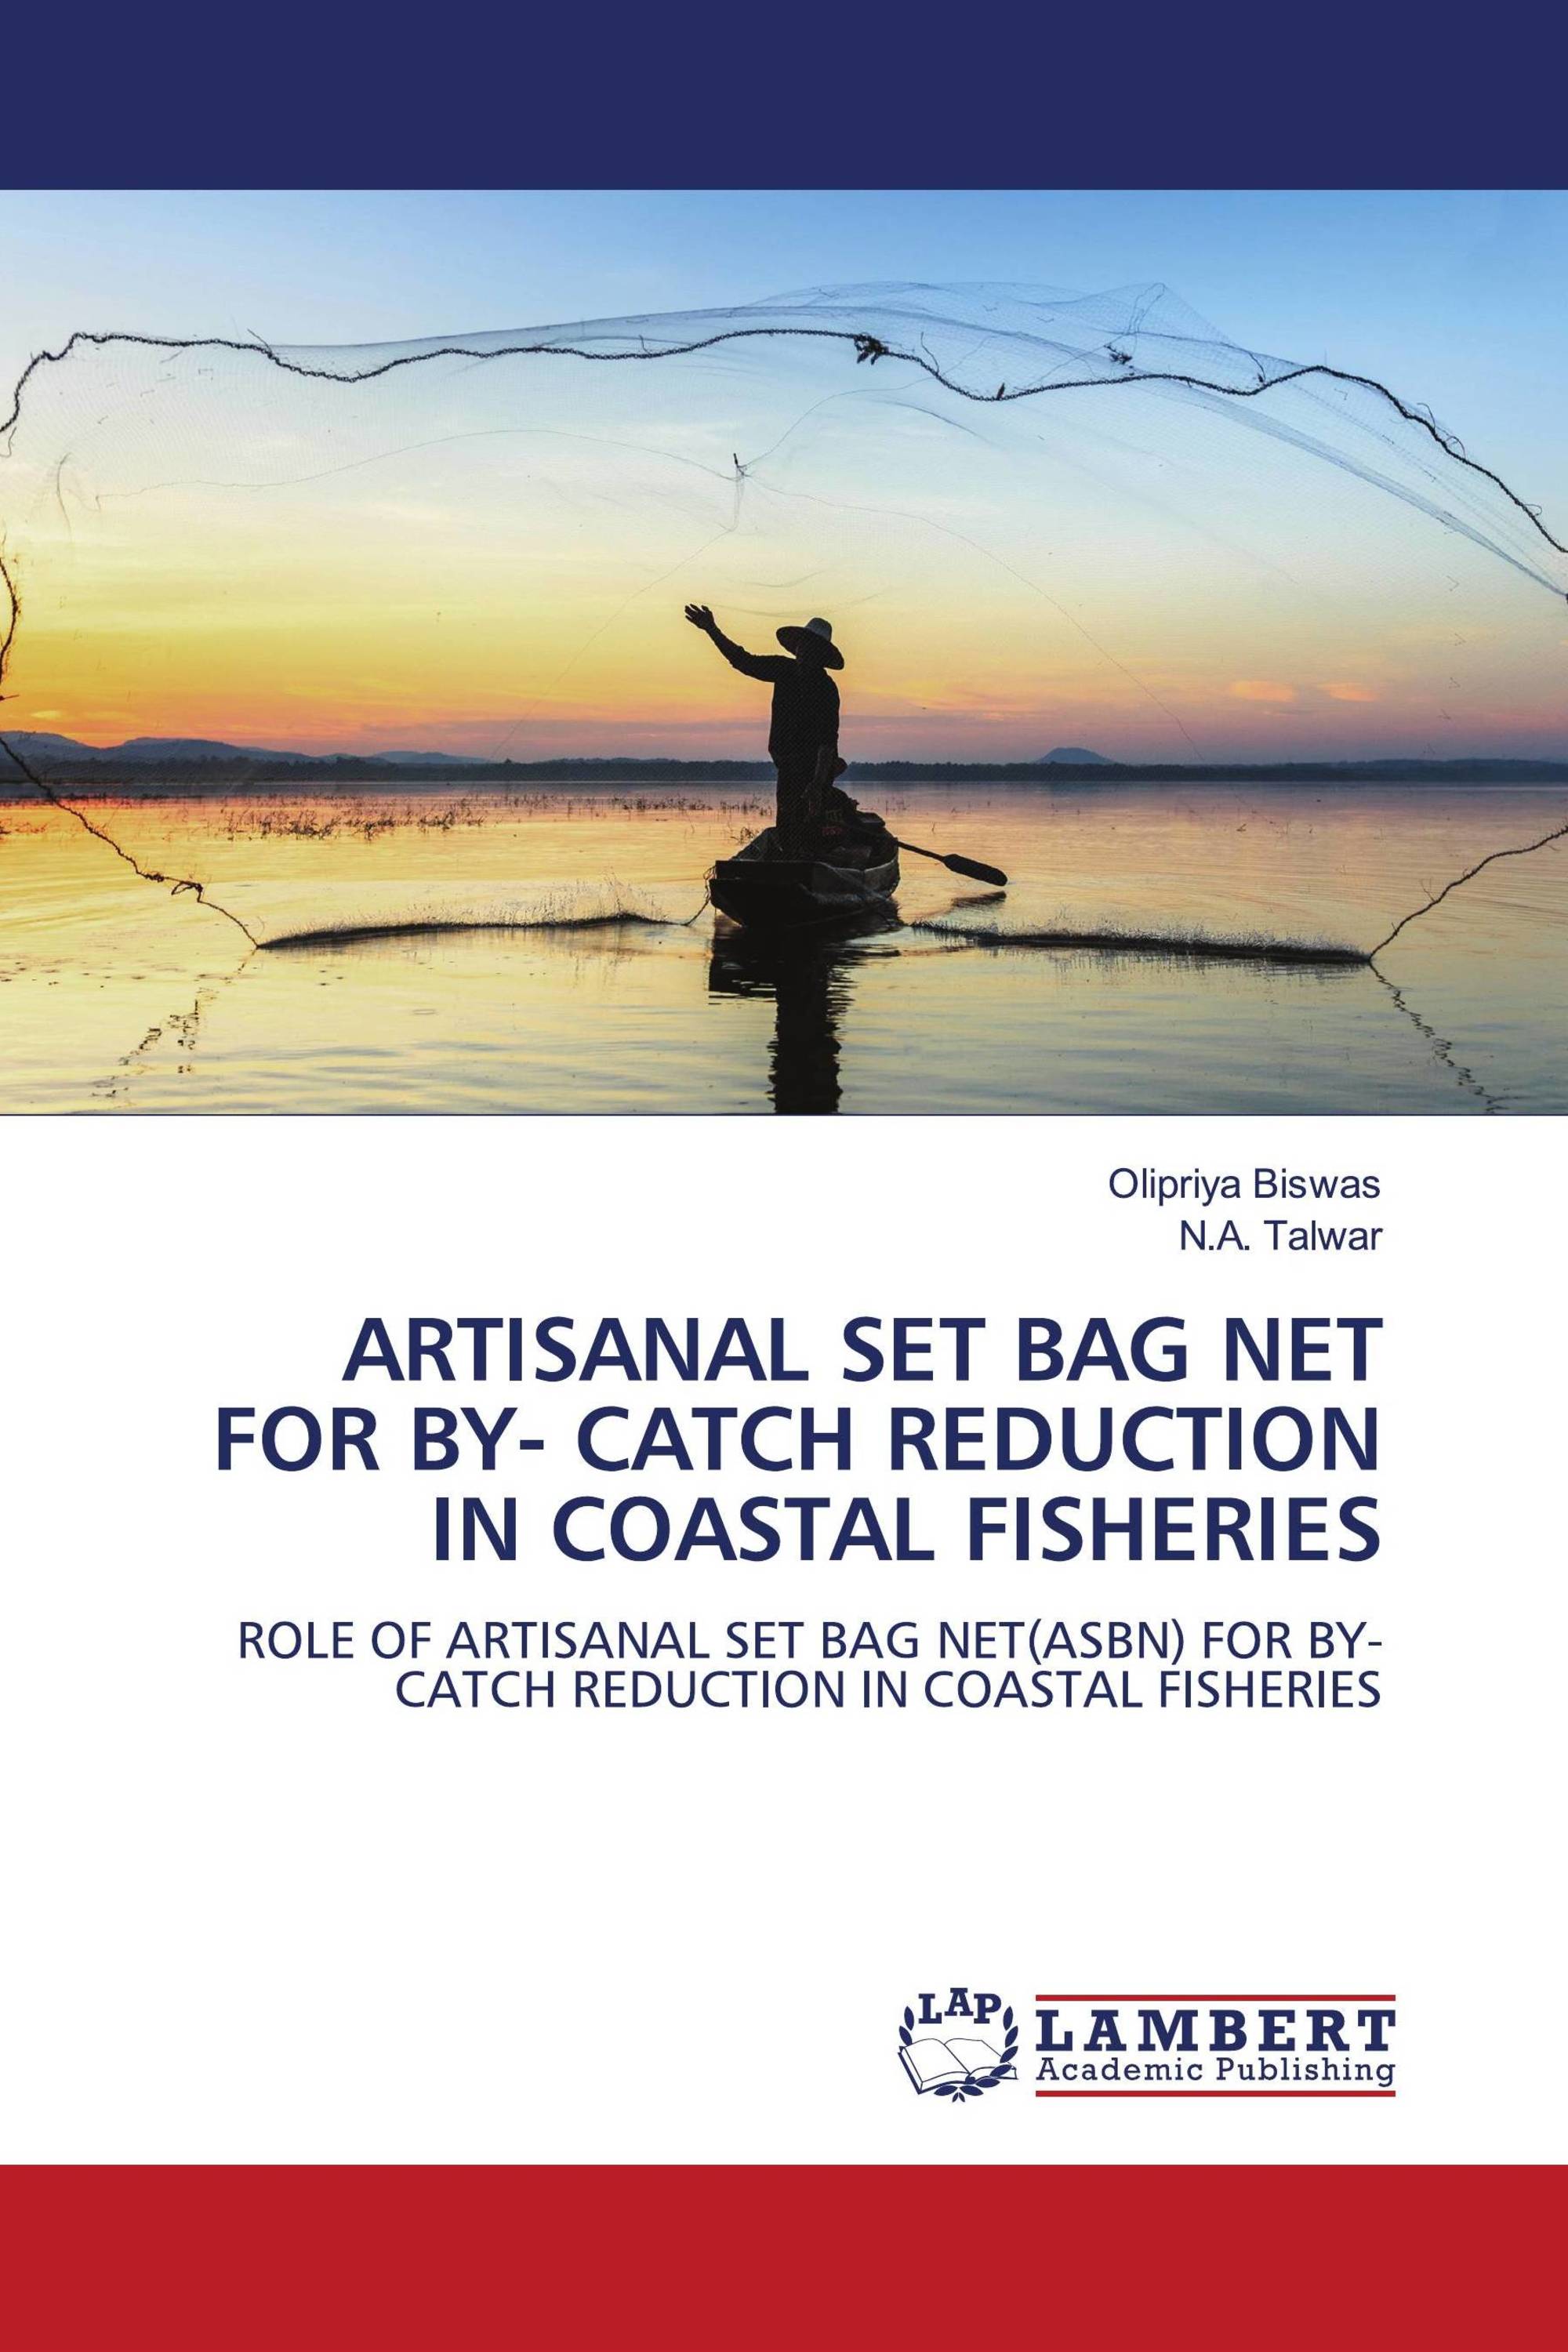 ARTISANAL SET BAG NET FOR BY- CATCH REDUCTION IN COASTAL FISHERIES